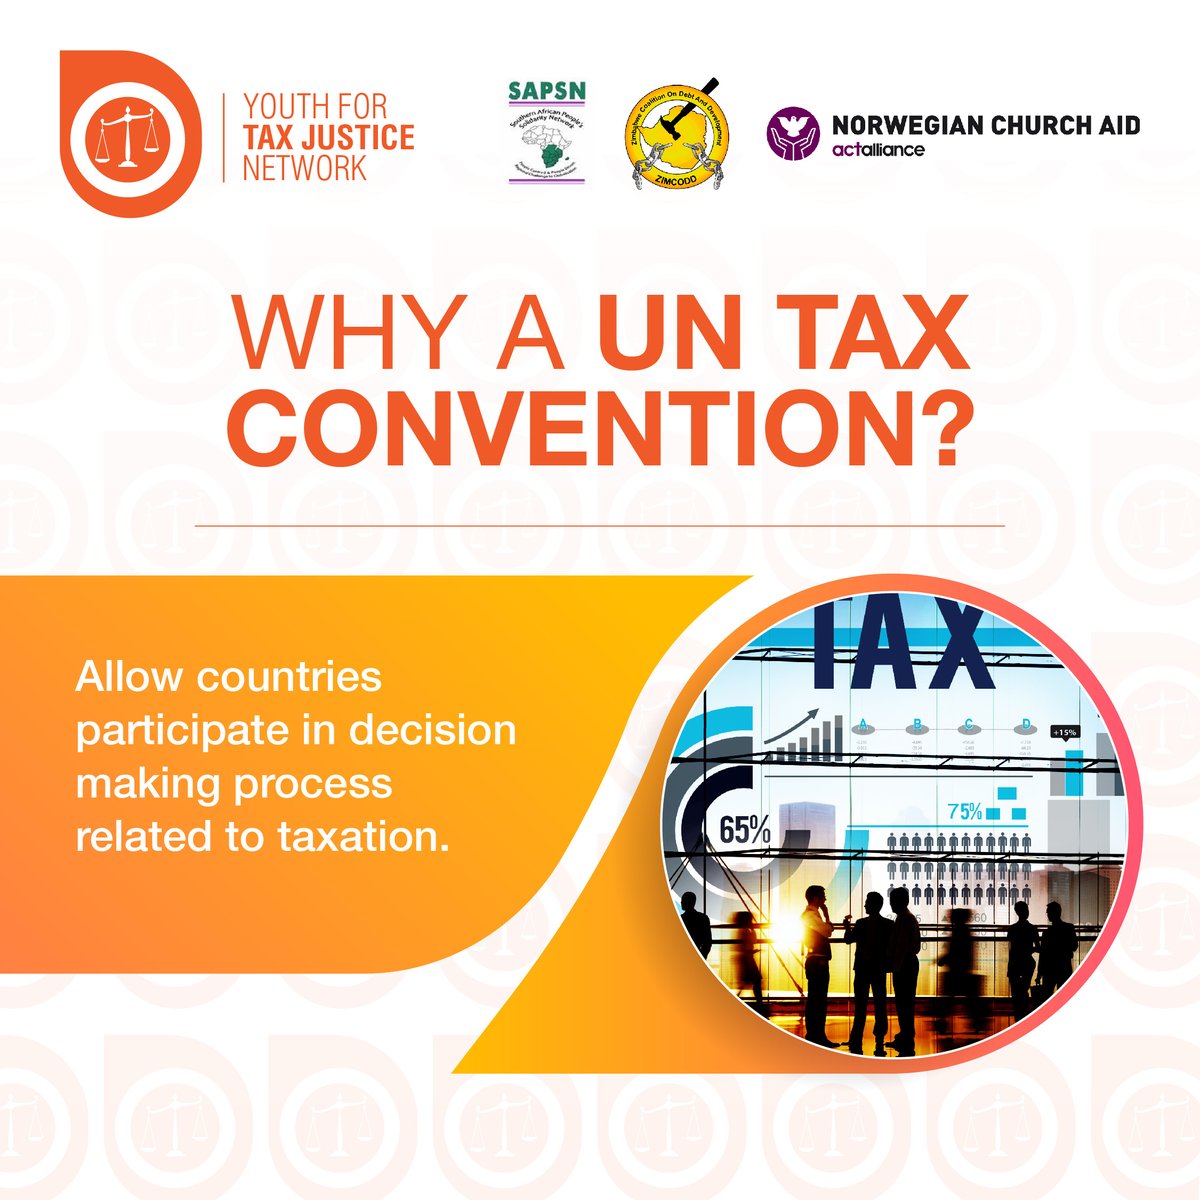 Unlike Framework conventions, Standard conventions create legally binding obligations because their provisions have specific rules, standards, and requirements that can be enforced through arbitration when violated. #UNTaxConvention ytjn.org/blog/the-case-…